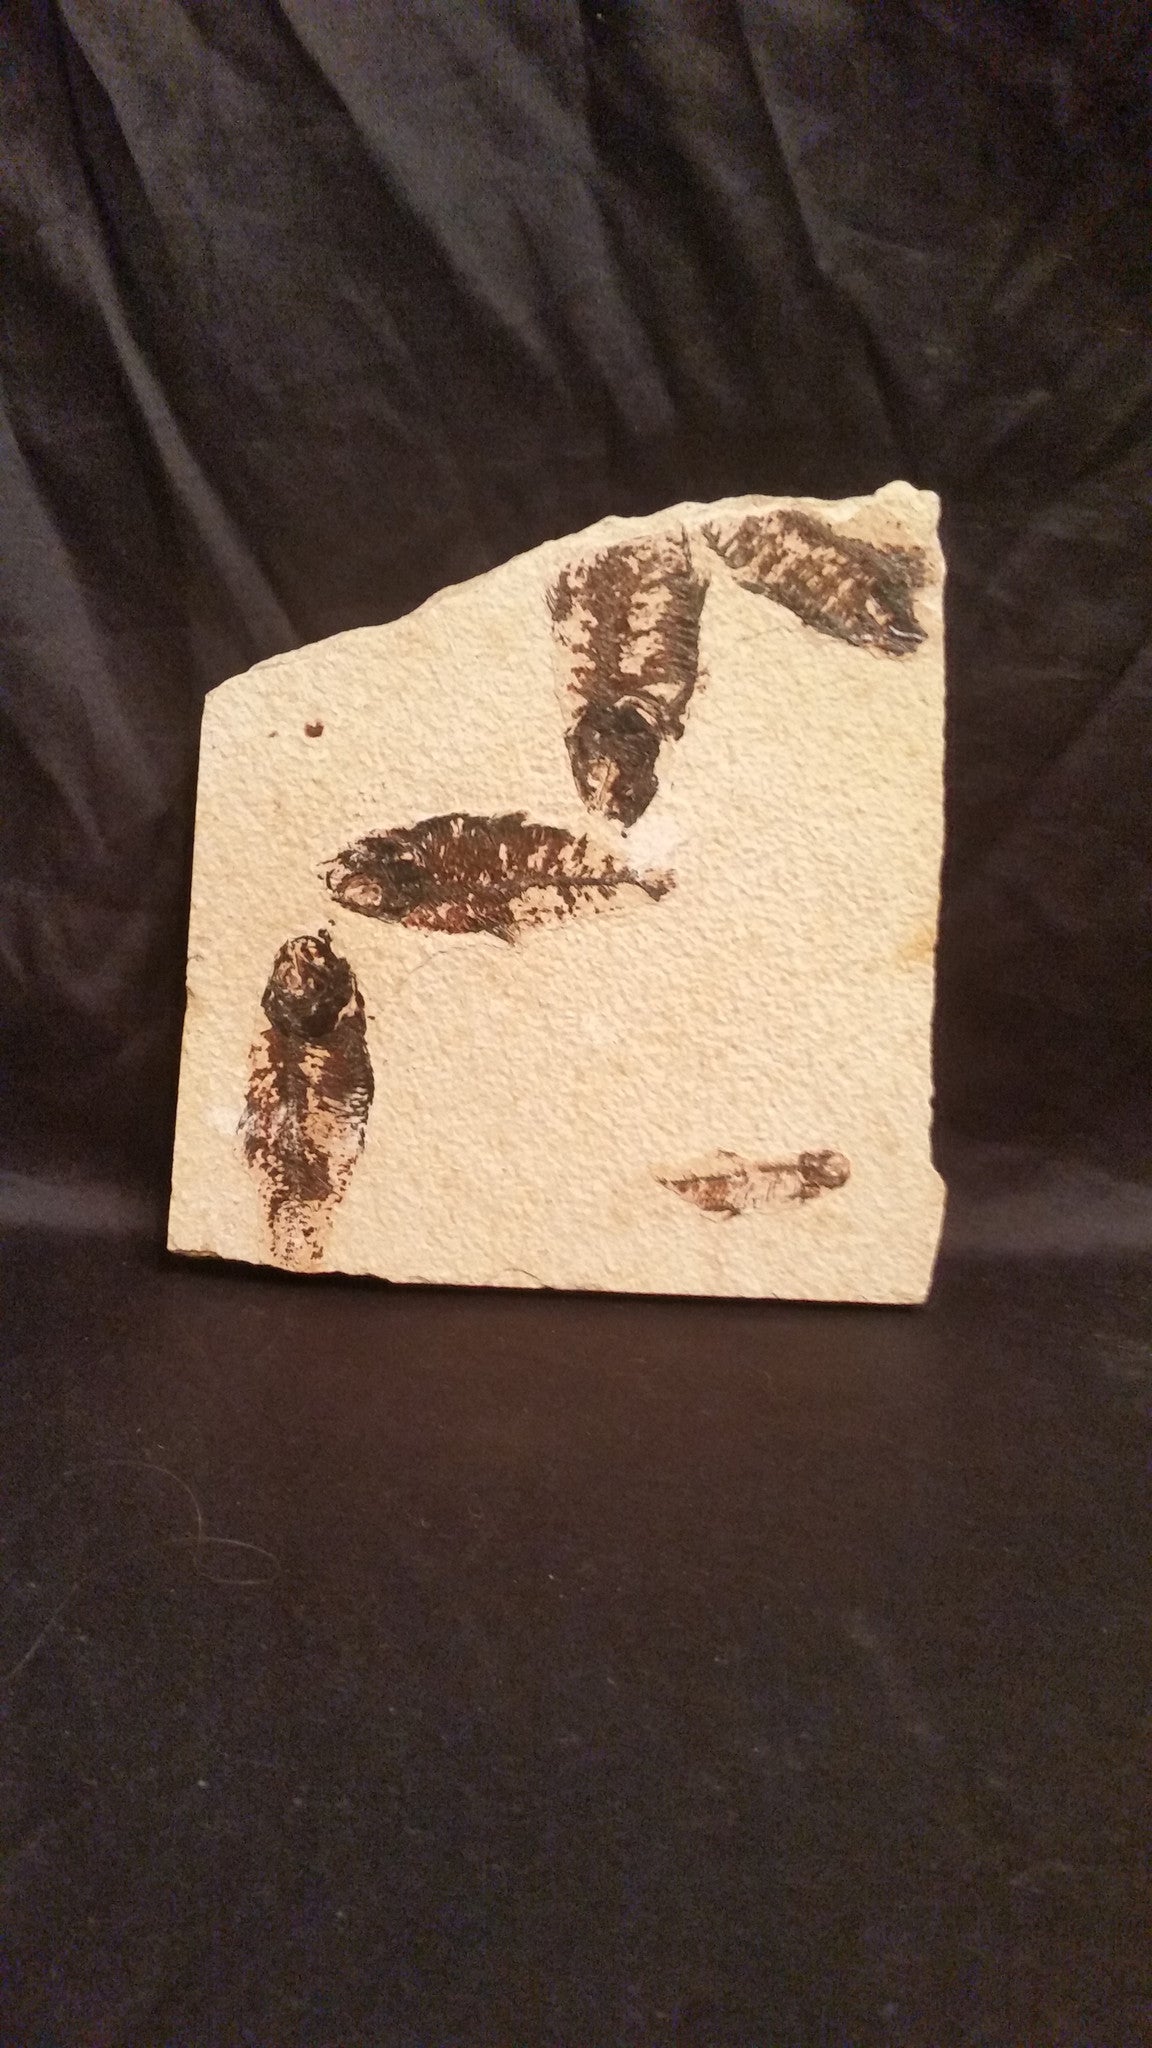 Fossil Fish, multiple fossils